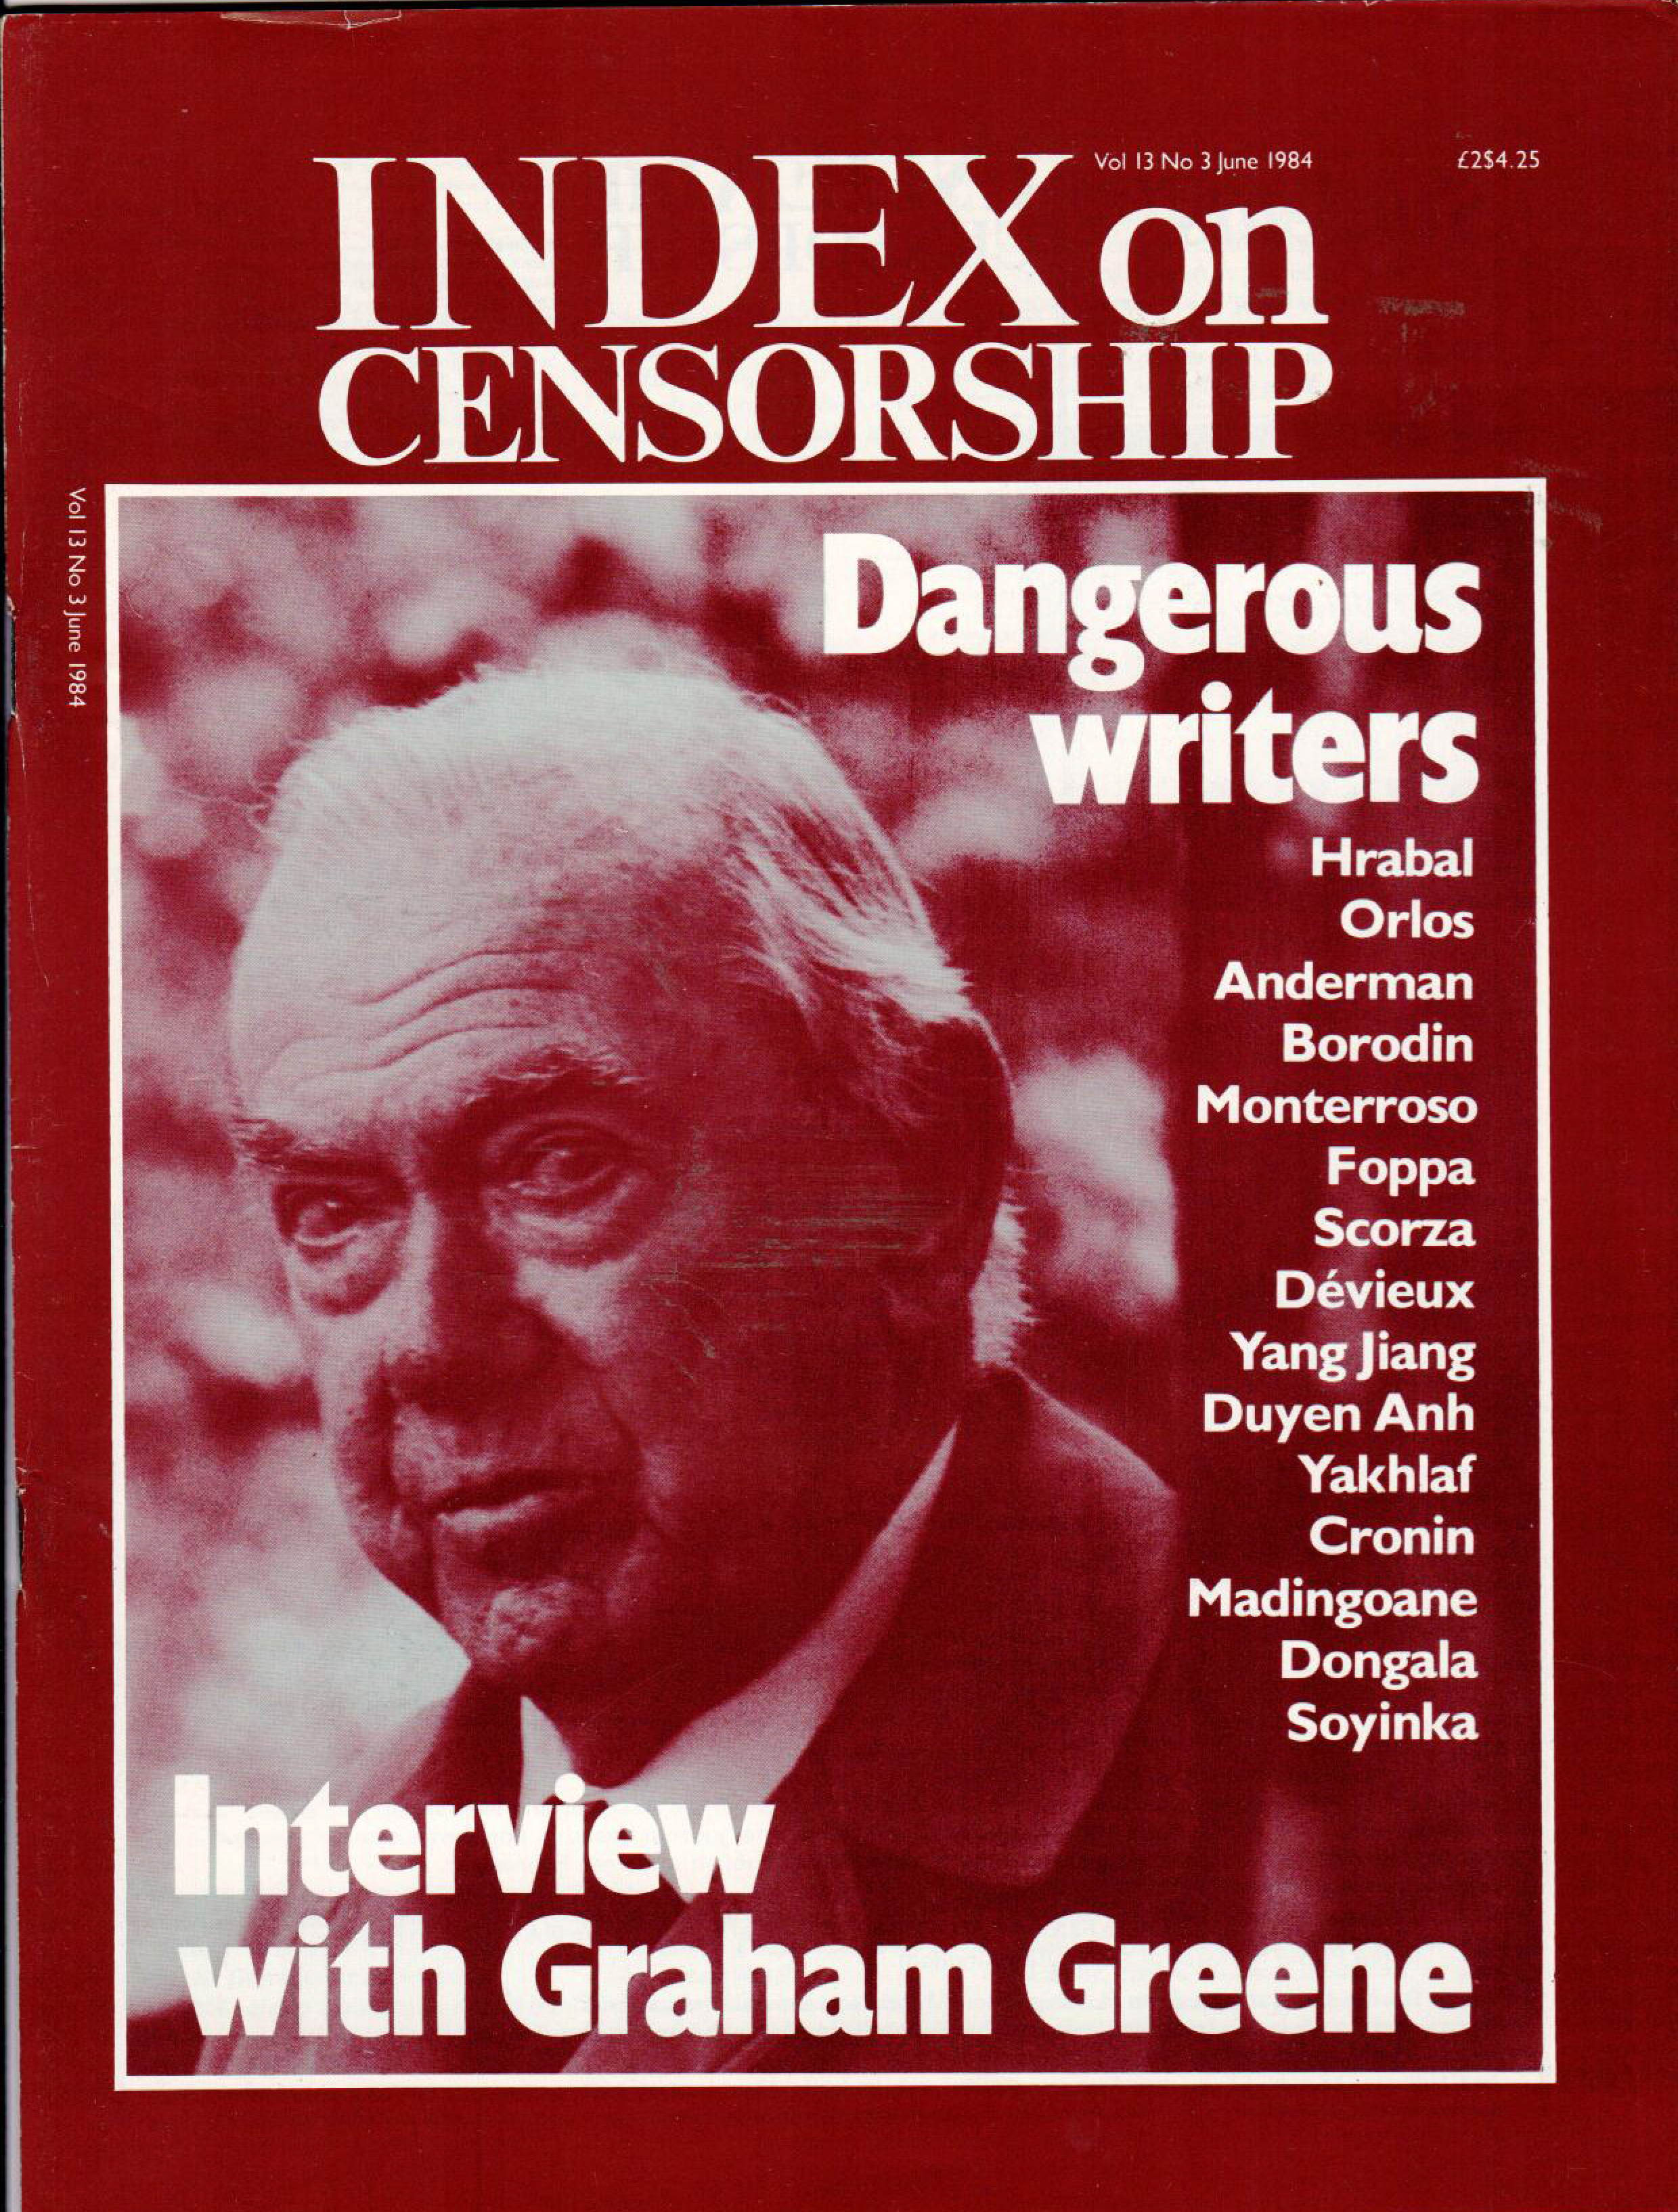 Dangerous writers, the June 1984 issue of Index on Censorship magazine